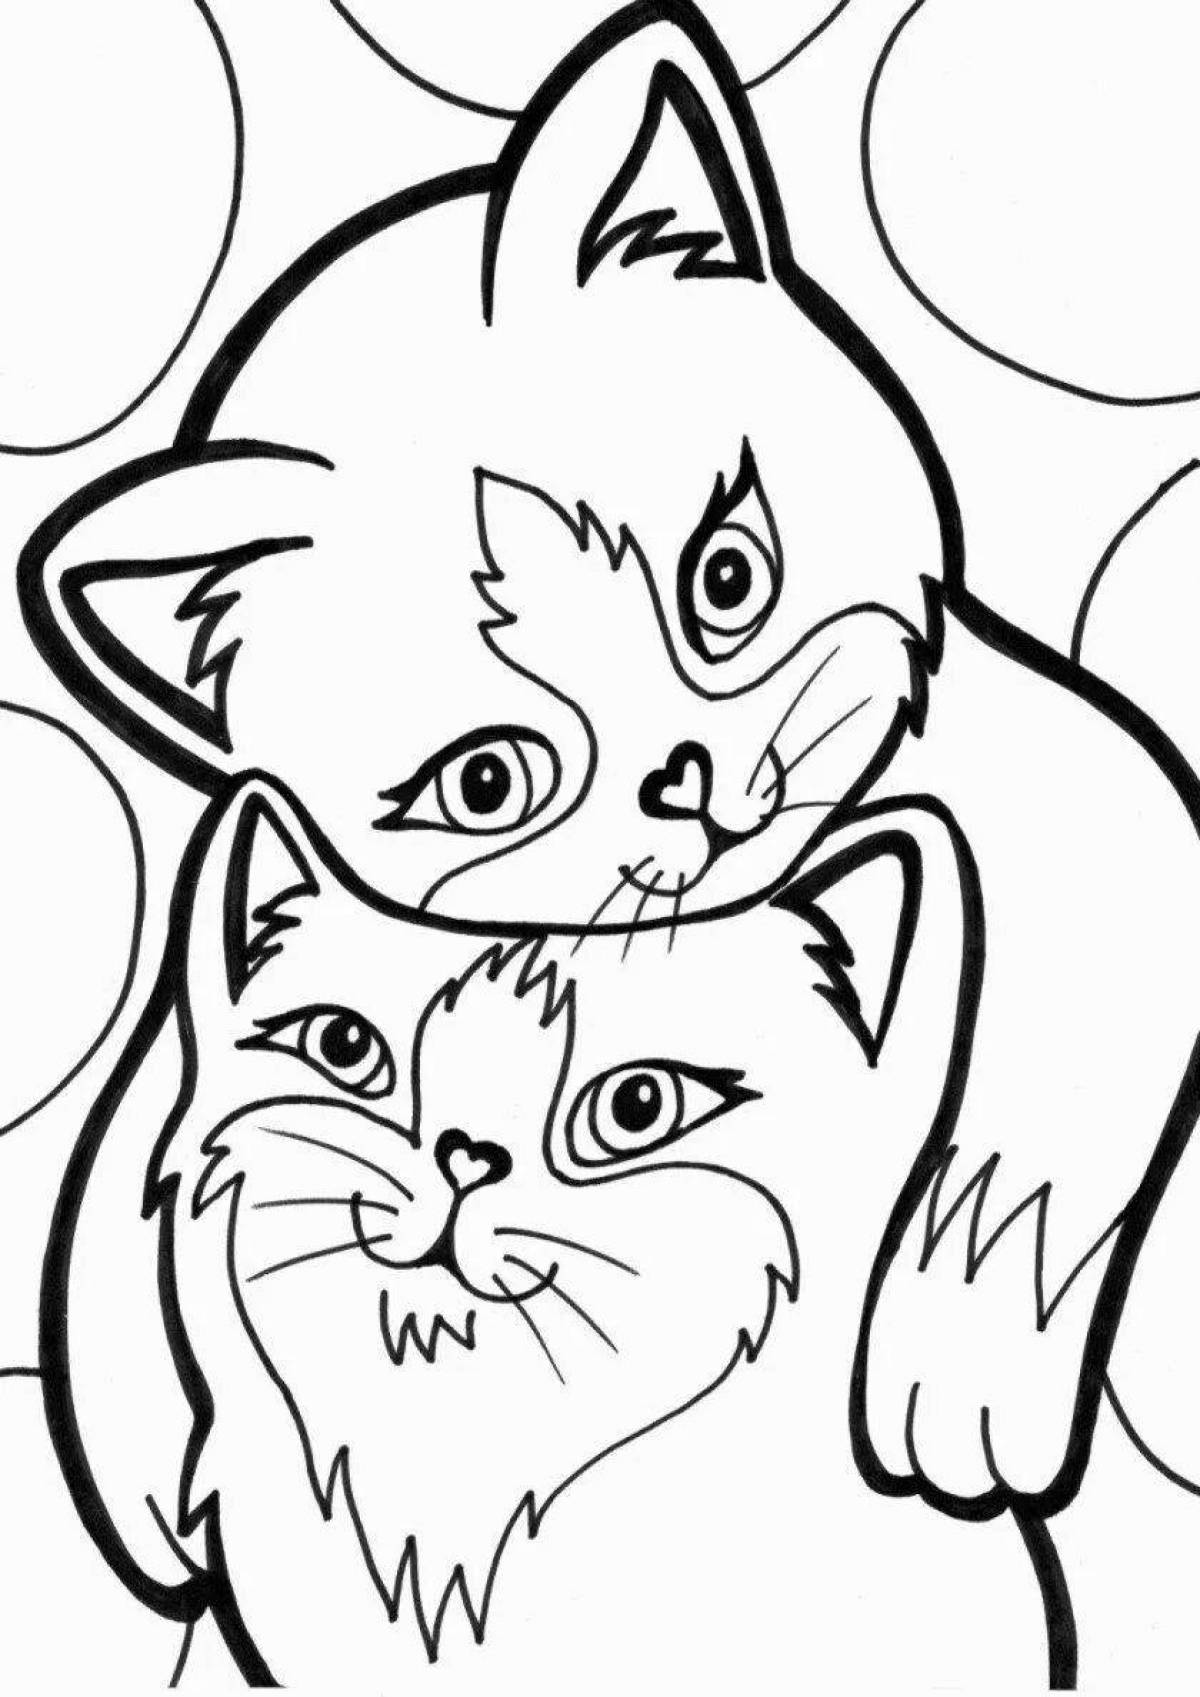 Exquisite cat coloring page